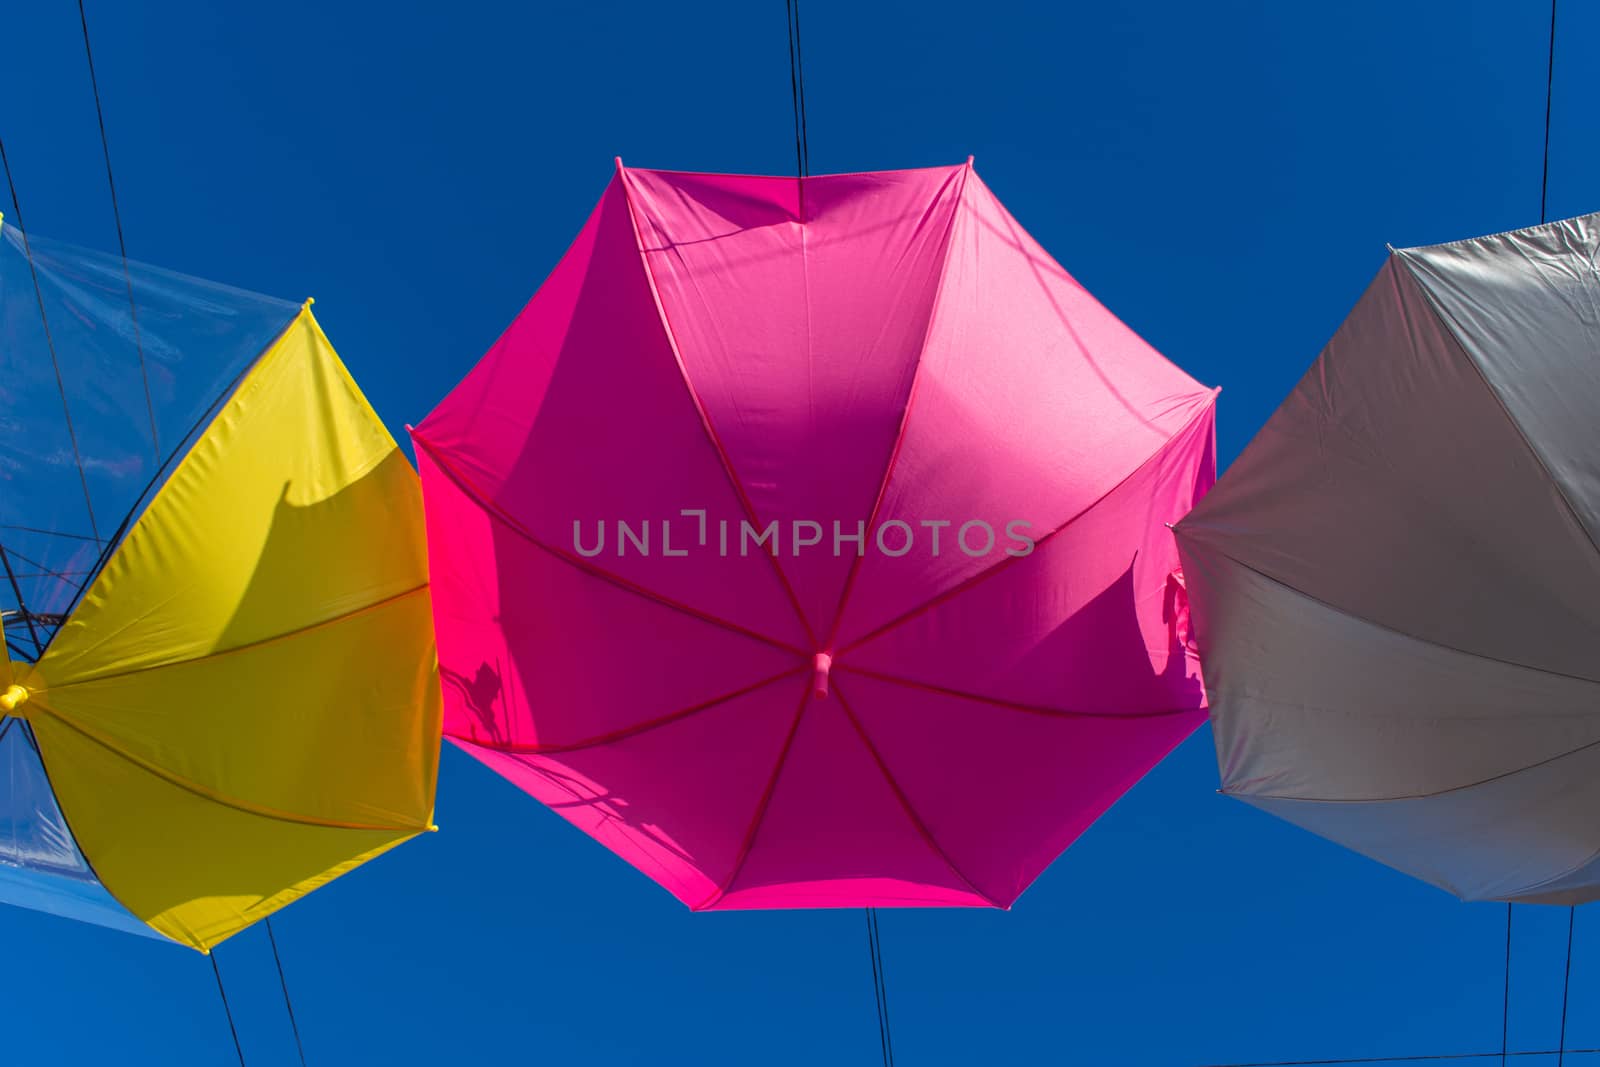 Colorful vibrant umbrellas hanging over the walking street for a festival on a blue sky sunny day close up of the pink umbrella.